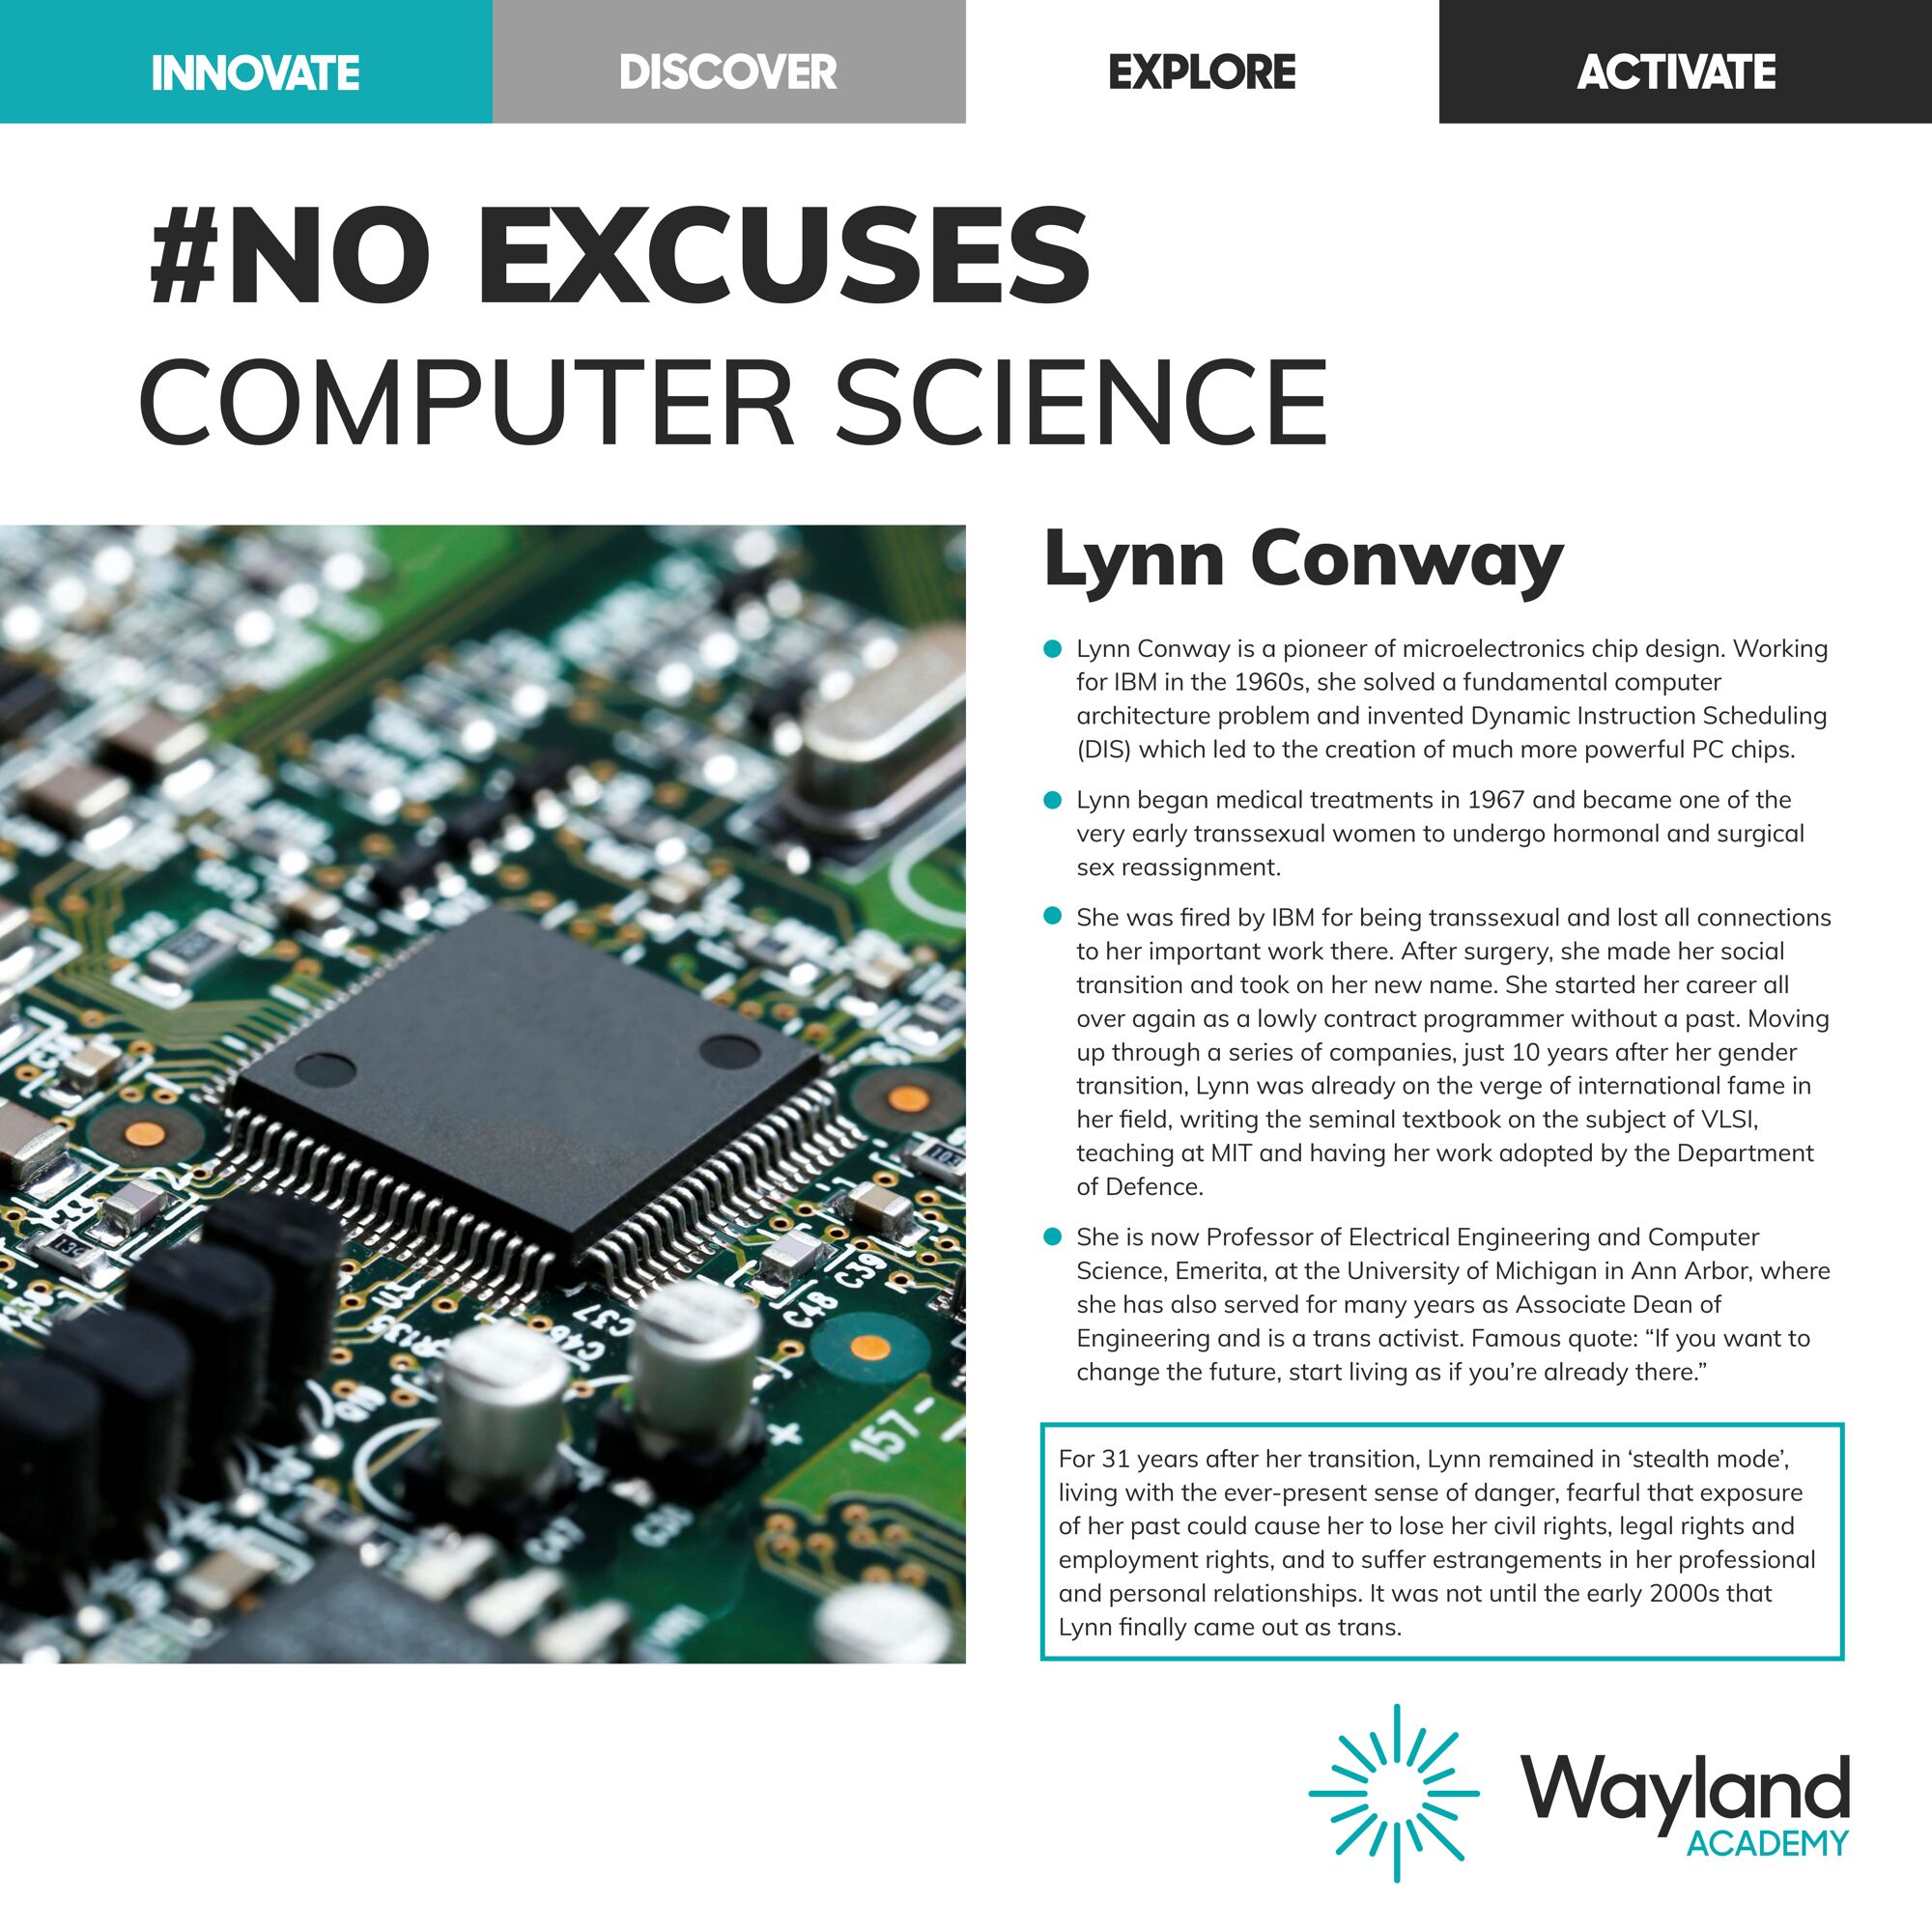 InspirationCurriculumCentre Wayland Academy Poster NoExcuseComputerScience [53816] page 0001